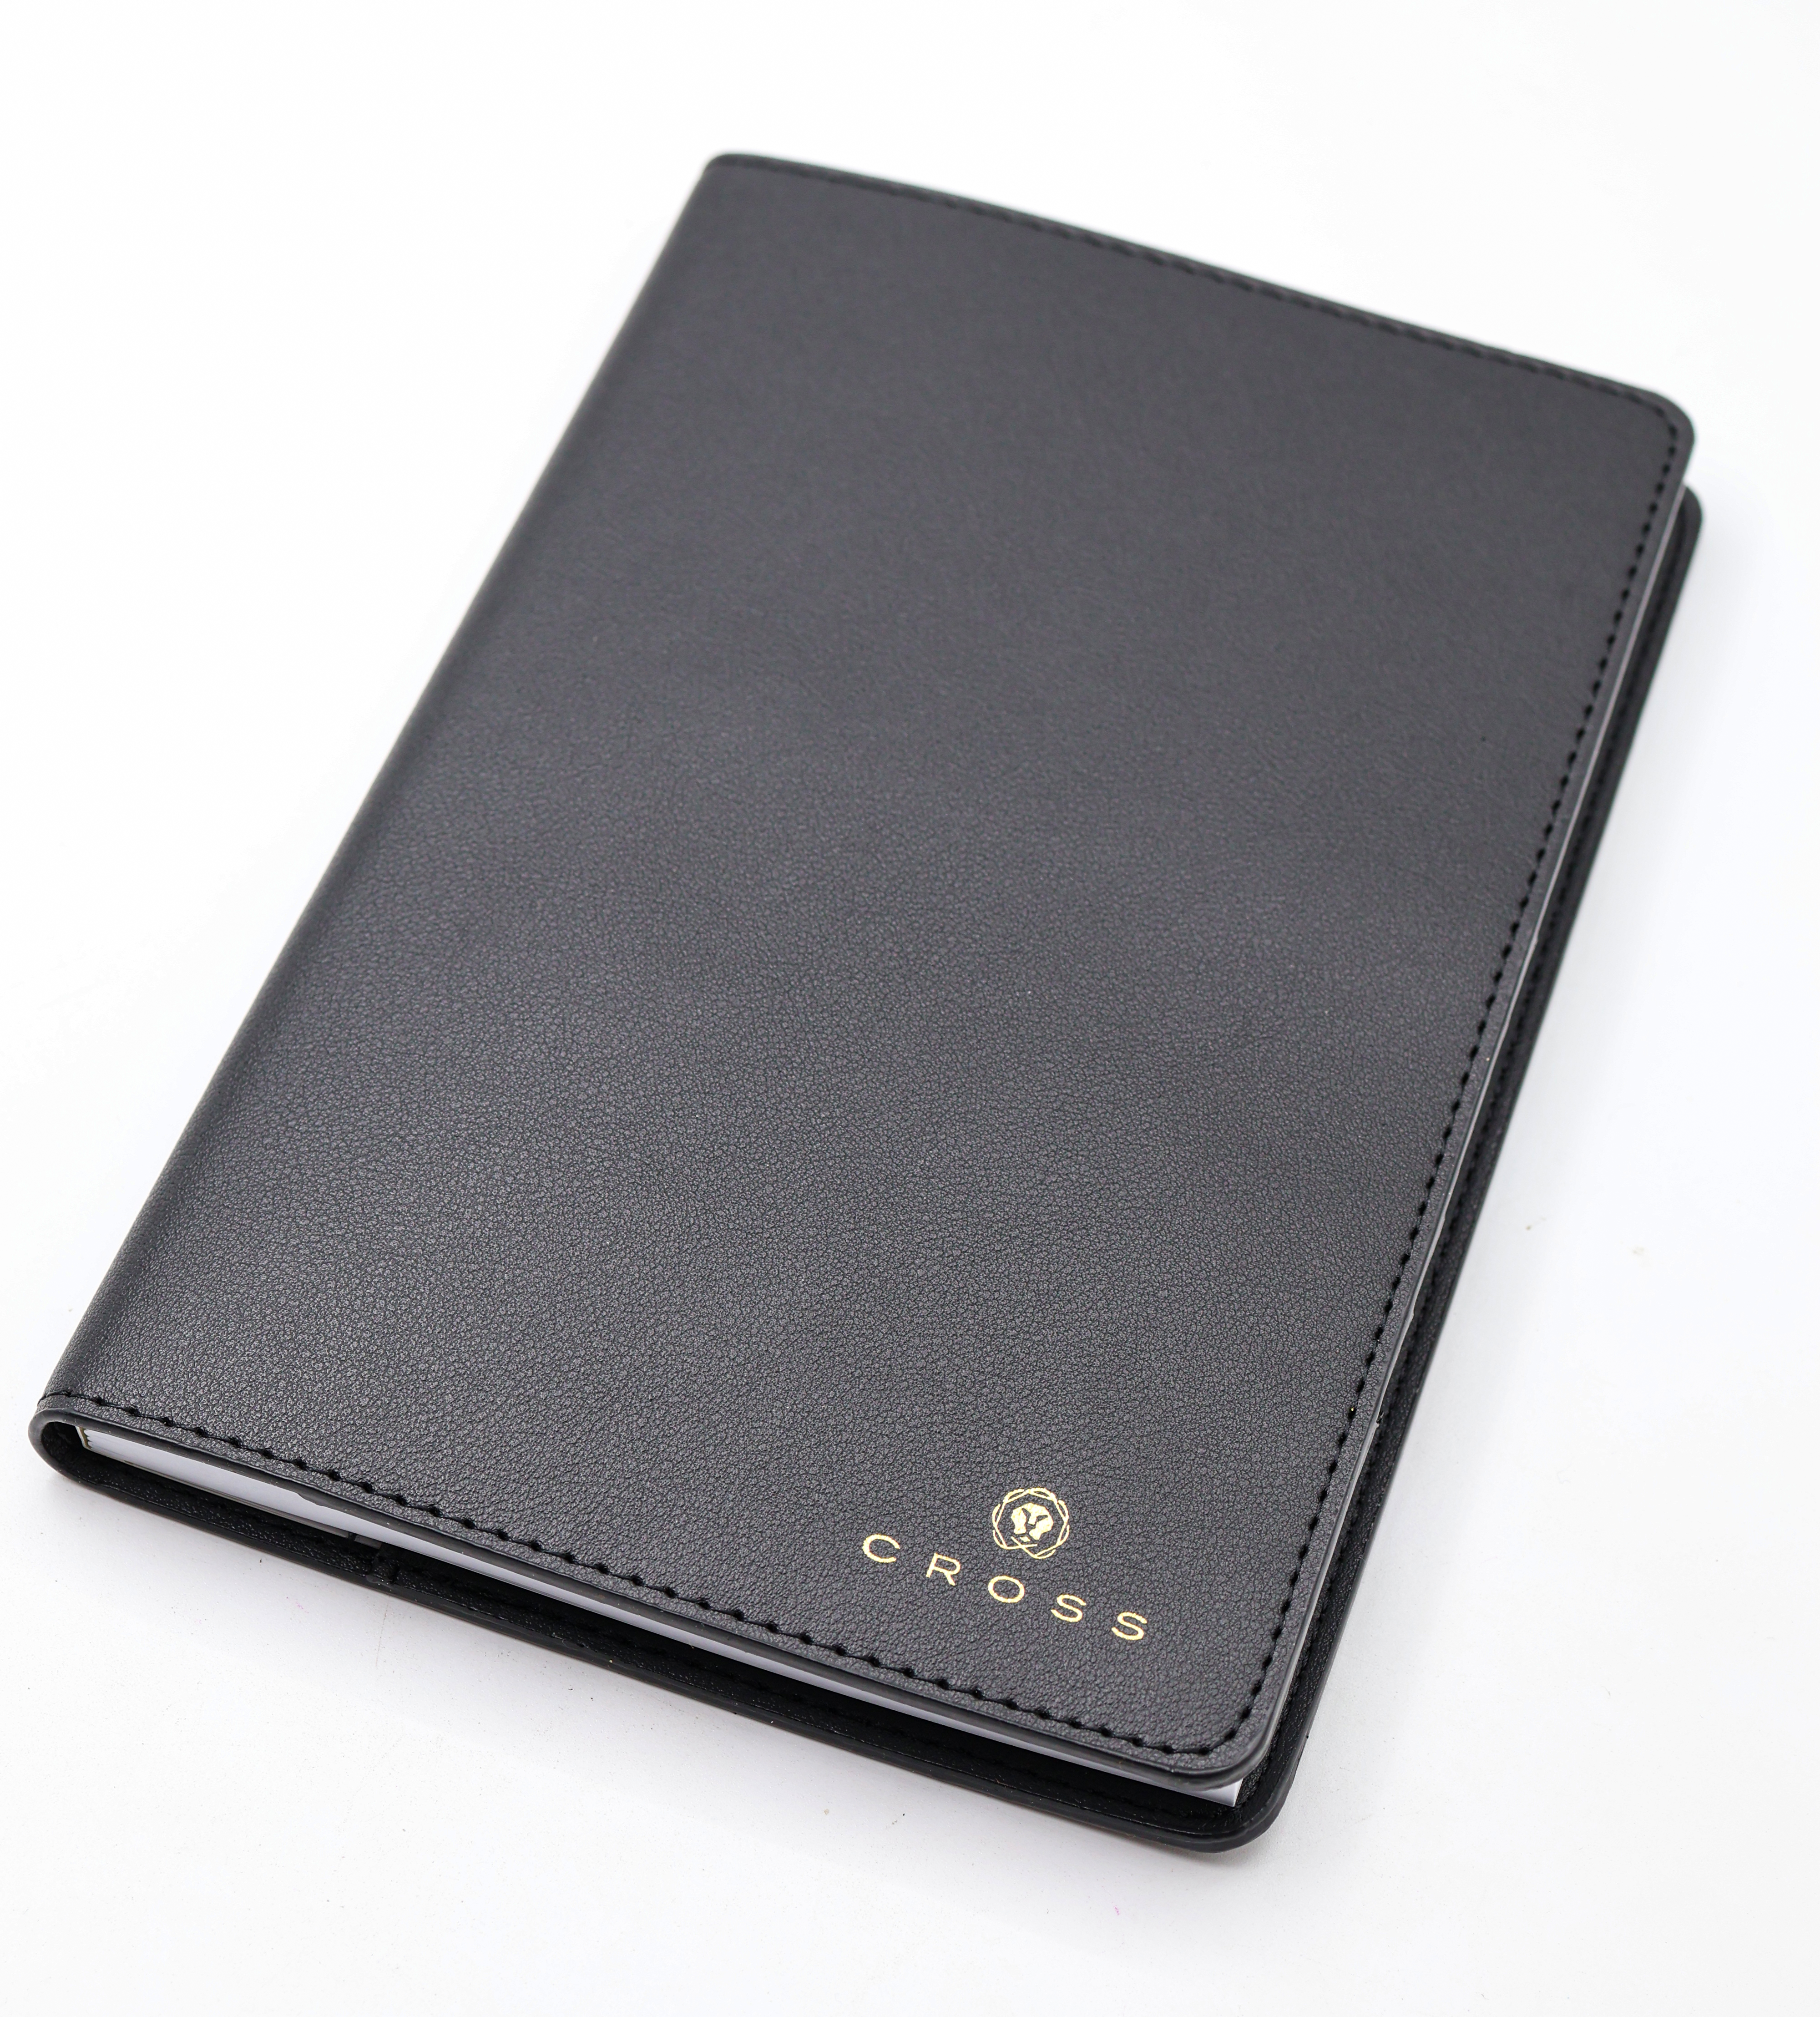 Cross Black Leather Dairy With 5 Card Slot Inside With Premium Quality Notebook  SKU 24837